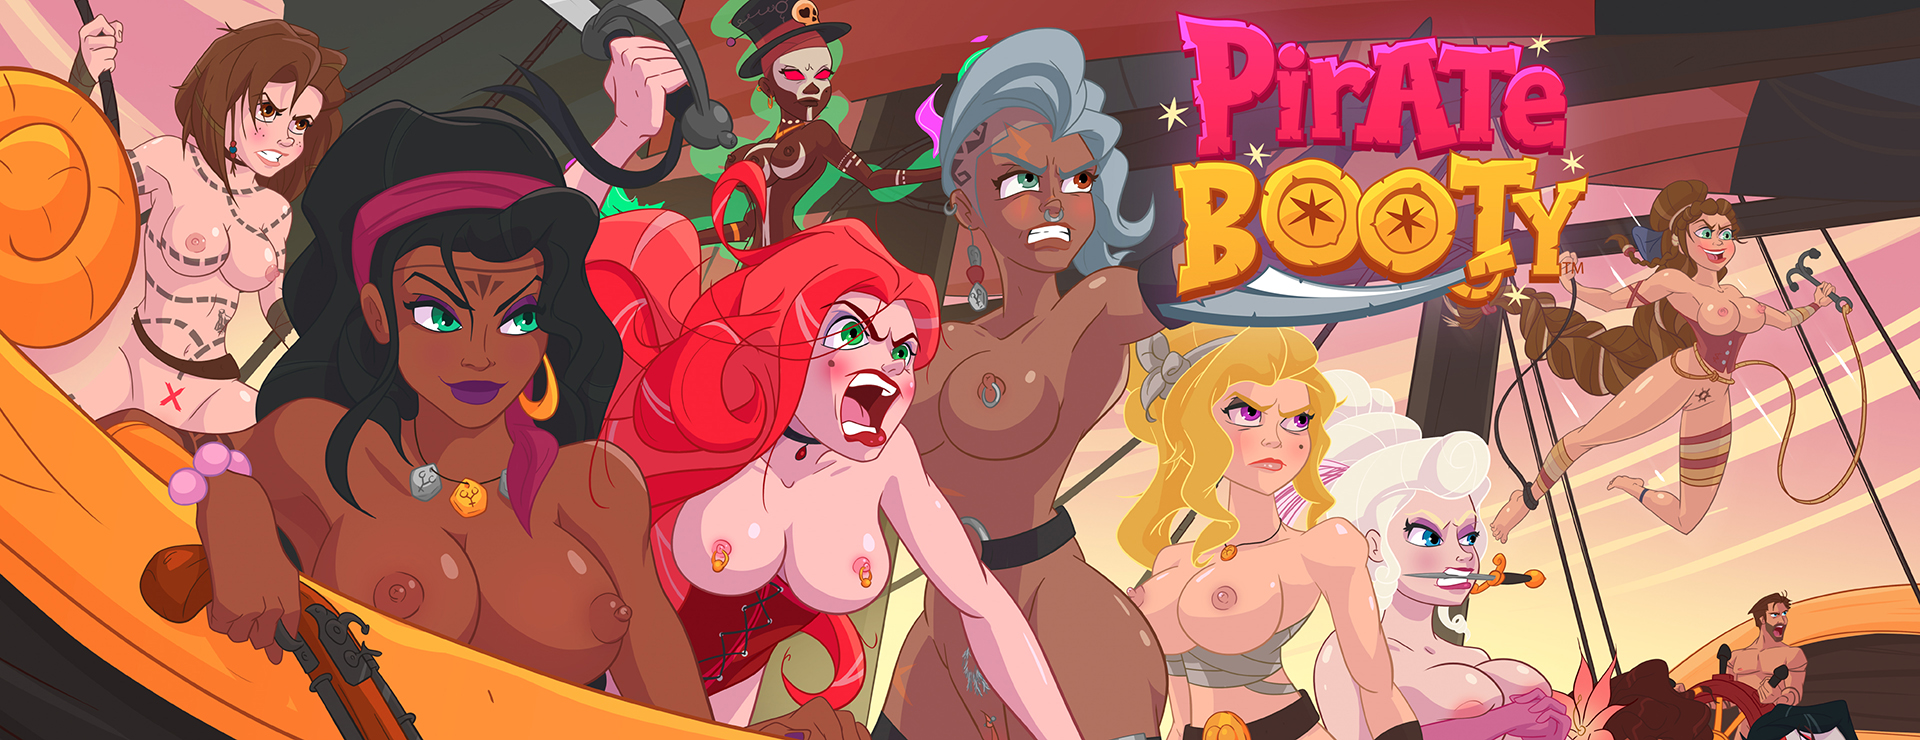 Pirate Booty - Casual Juego